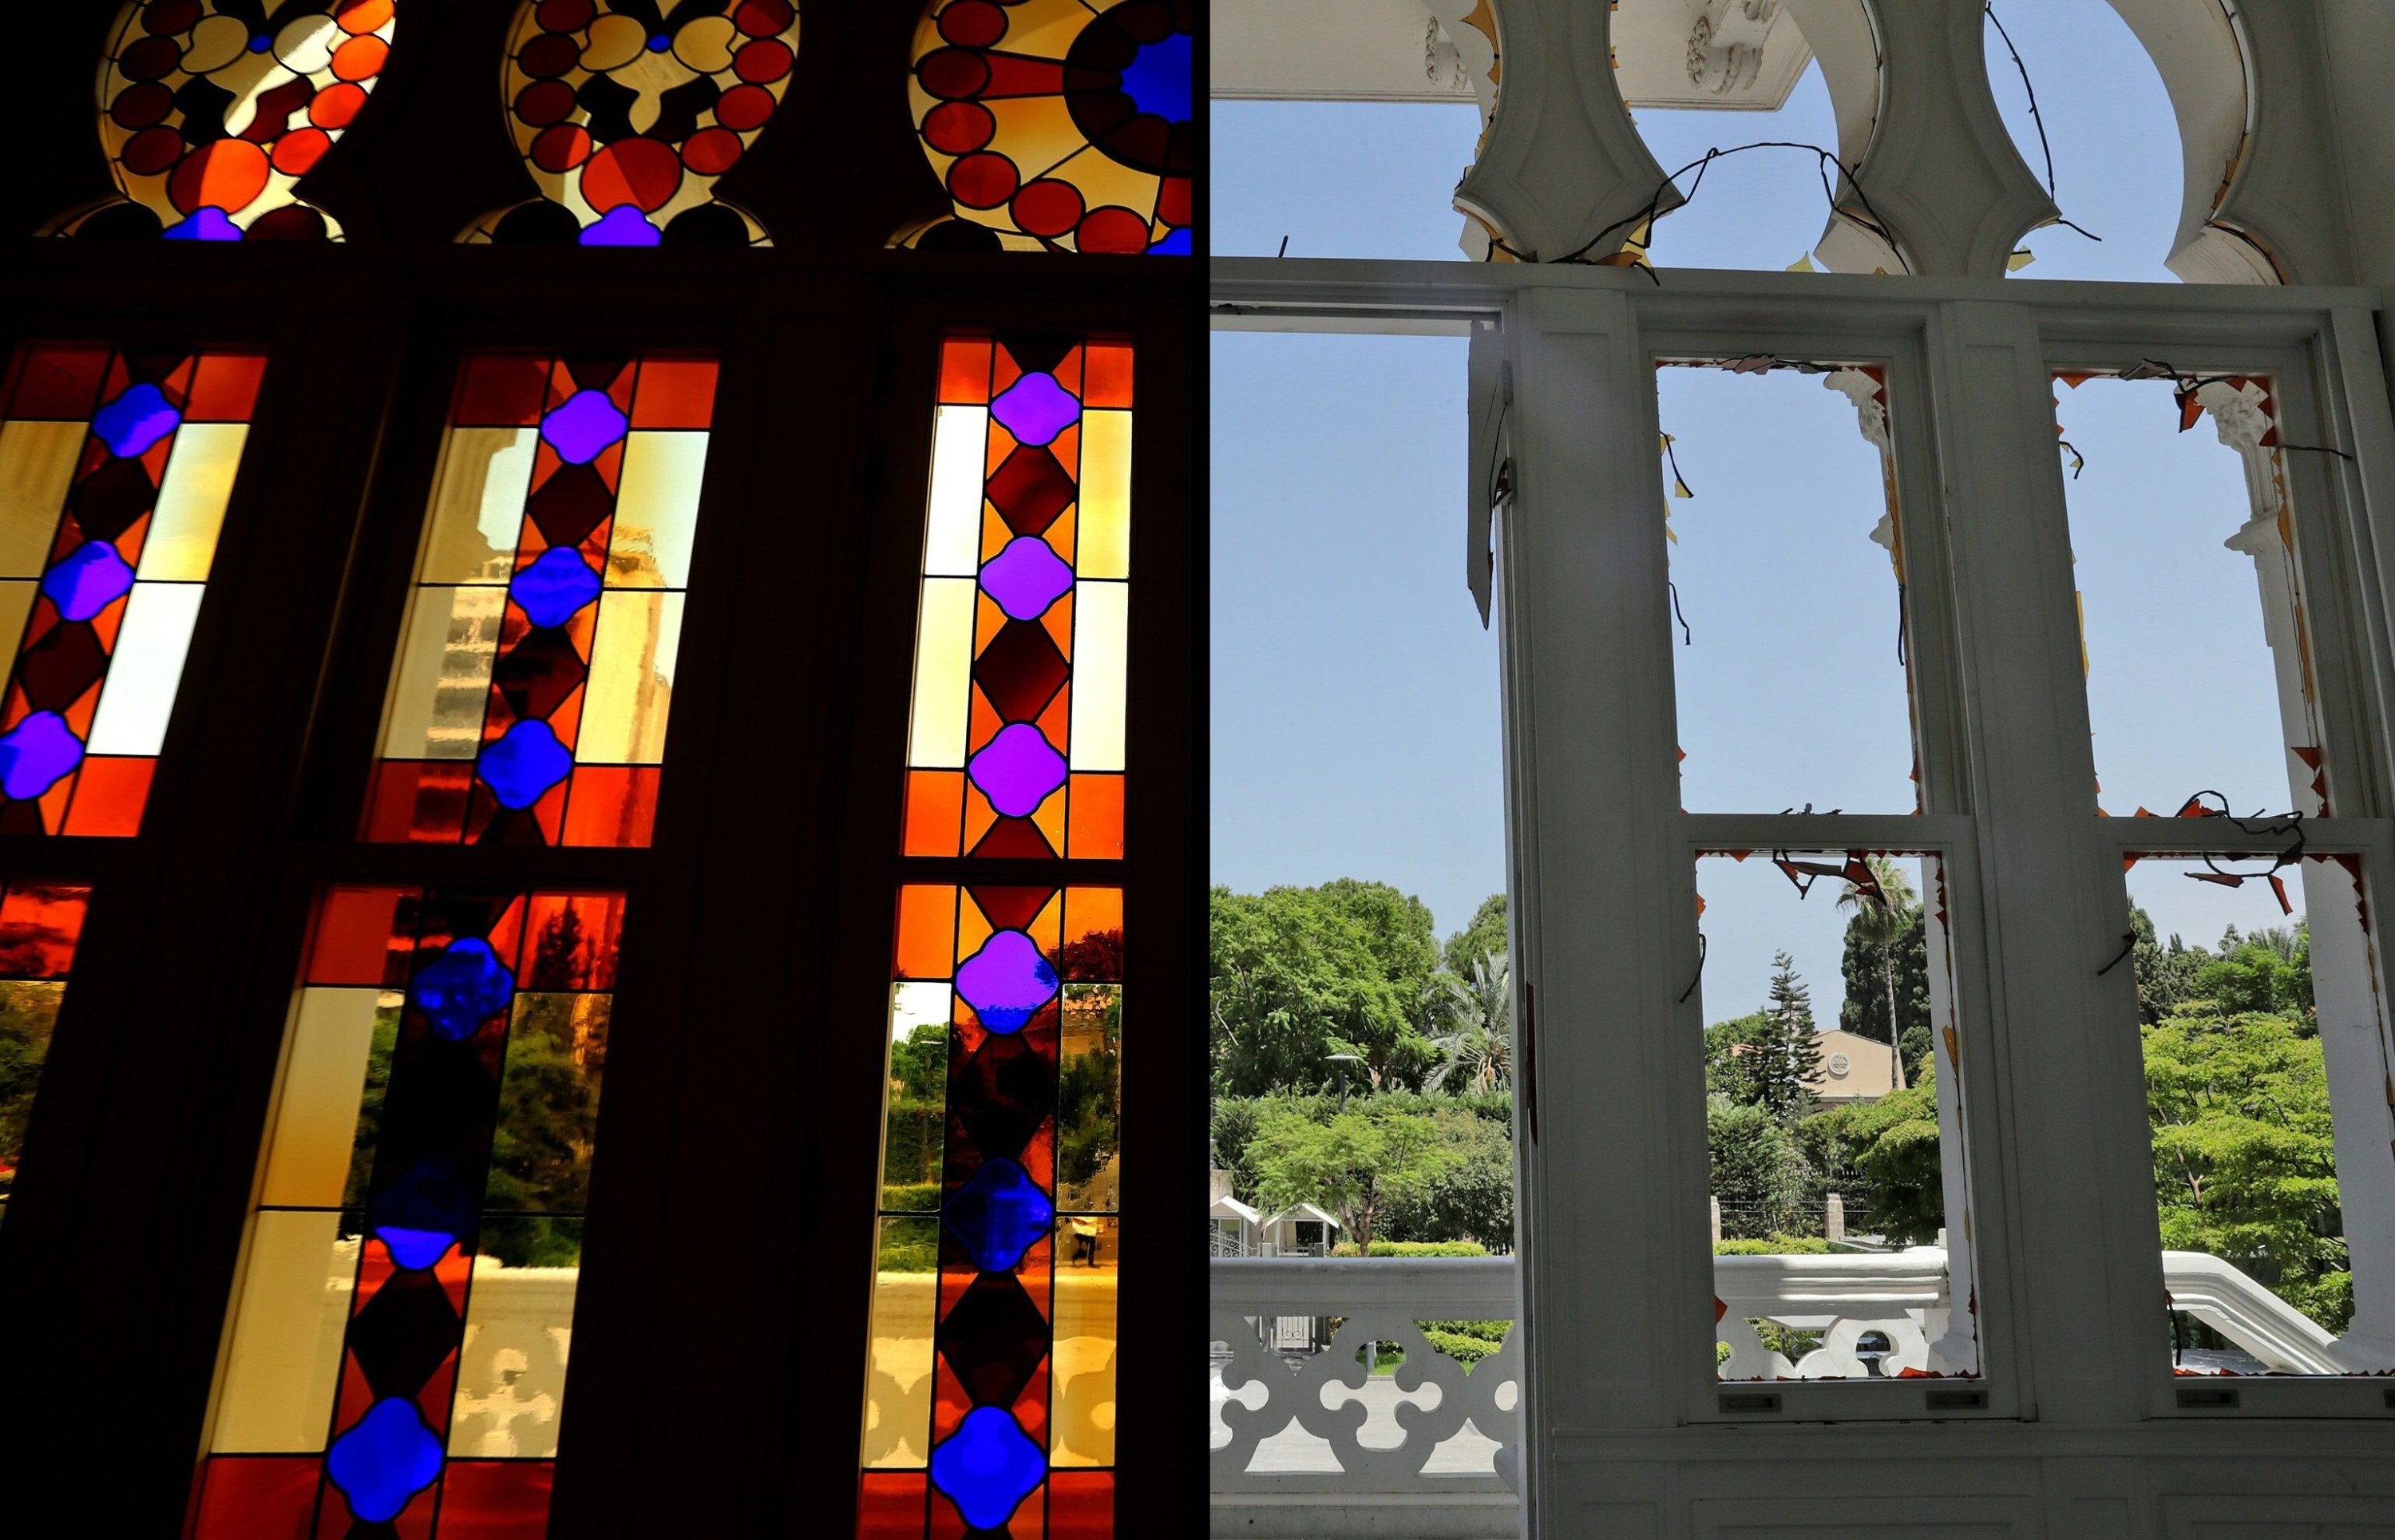 This combination of pictures created on Aug. 10, 2020 shows (L) a view of the stained glass windows at the Sursock Museum in Lebanon's capital Beirut on Oct. 5, 2015; and (R) an image of the museum taken on Aug. 8, 2020, showing the empty windows after their stained glass was broken in the aftermath of the massive blast at the Port of Beirut (AFP Photo)